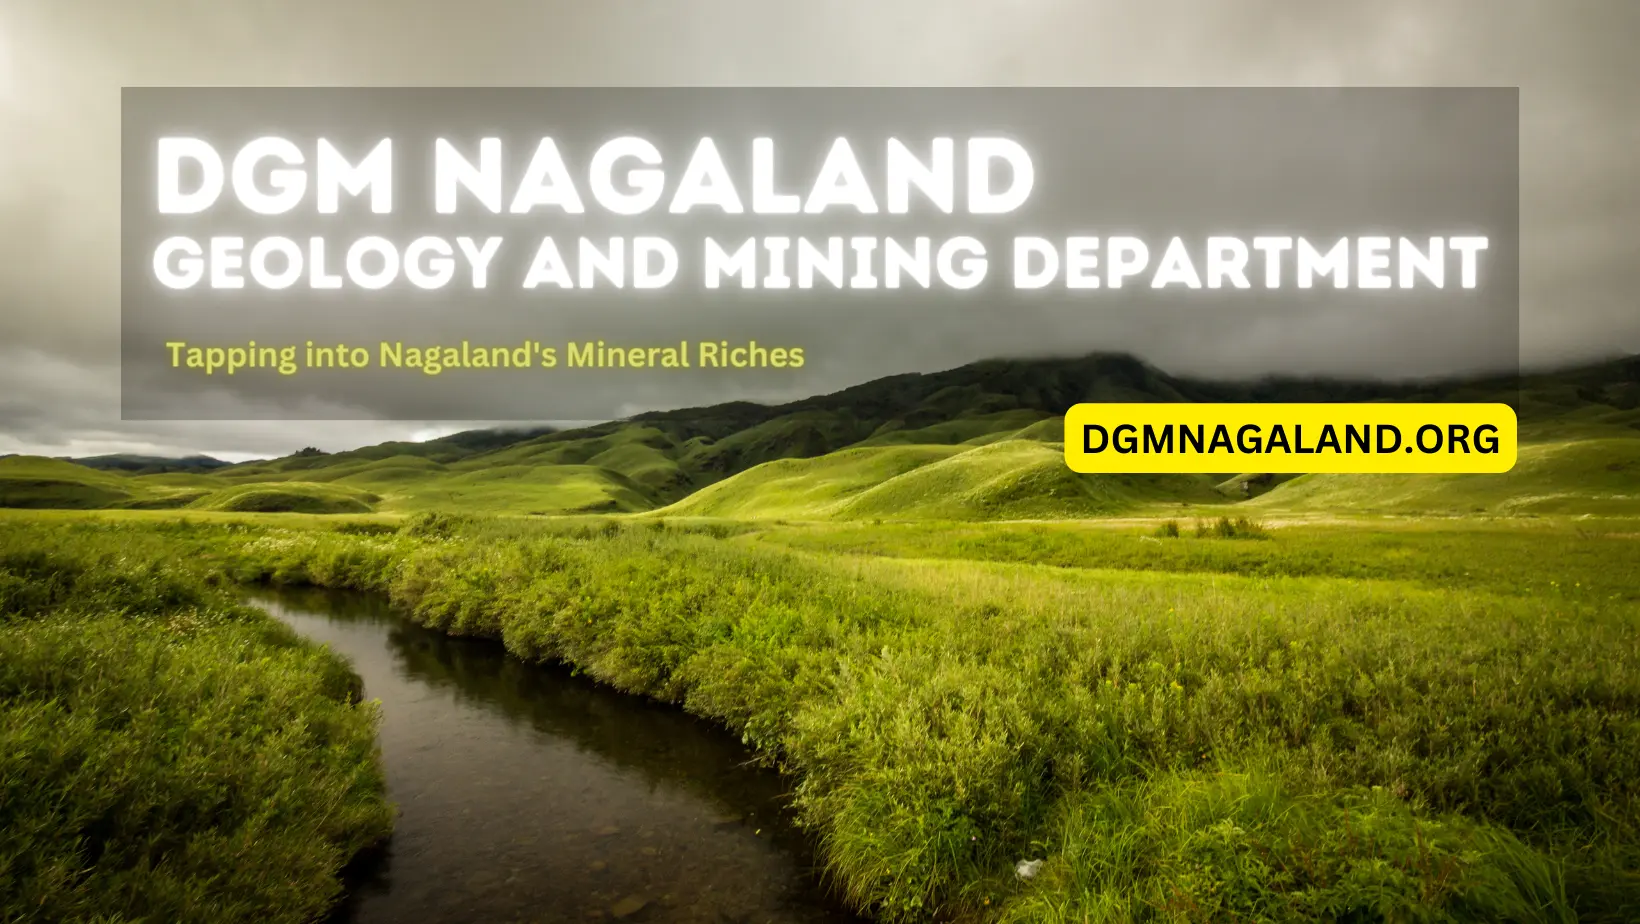 DGM Nagaland | Geology and Mining Department: Tapping into Nagaland’s Mineral Riches